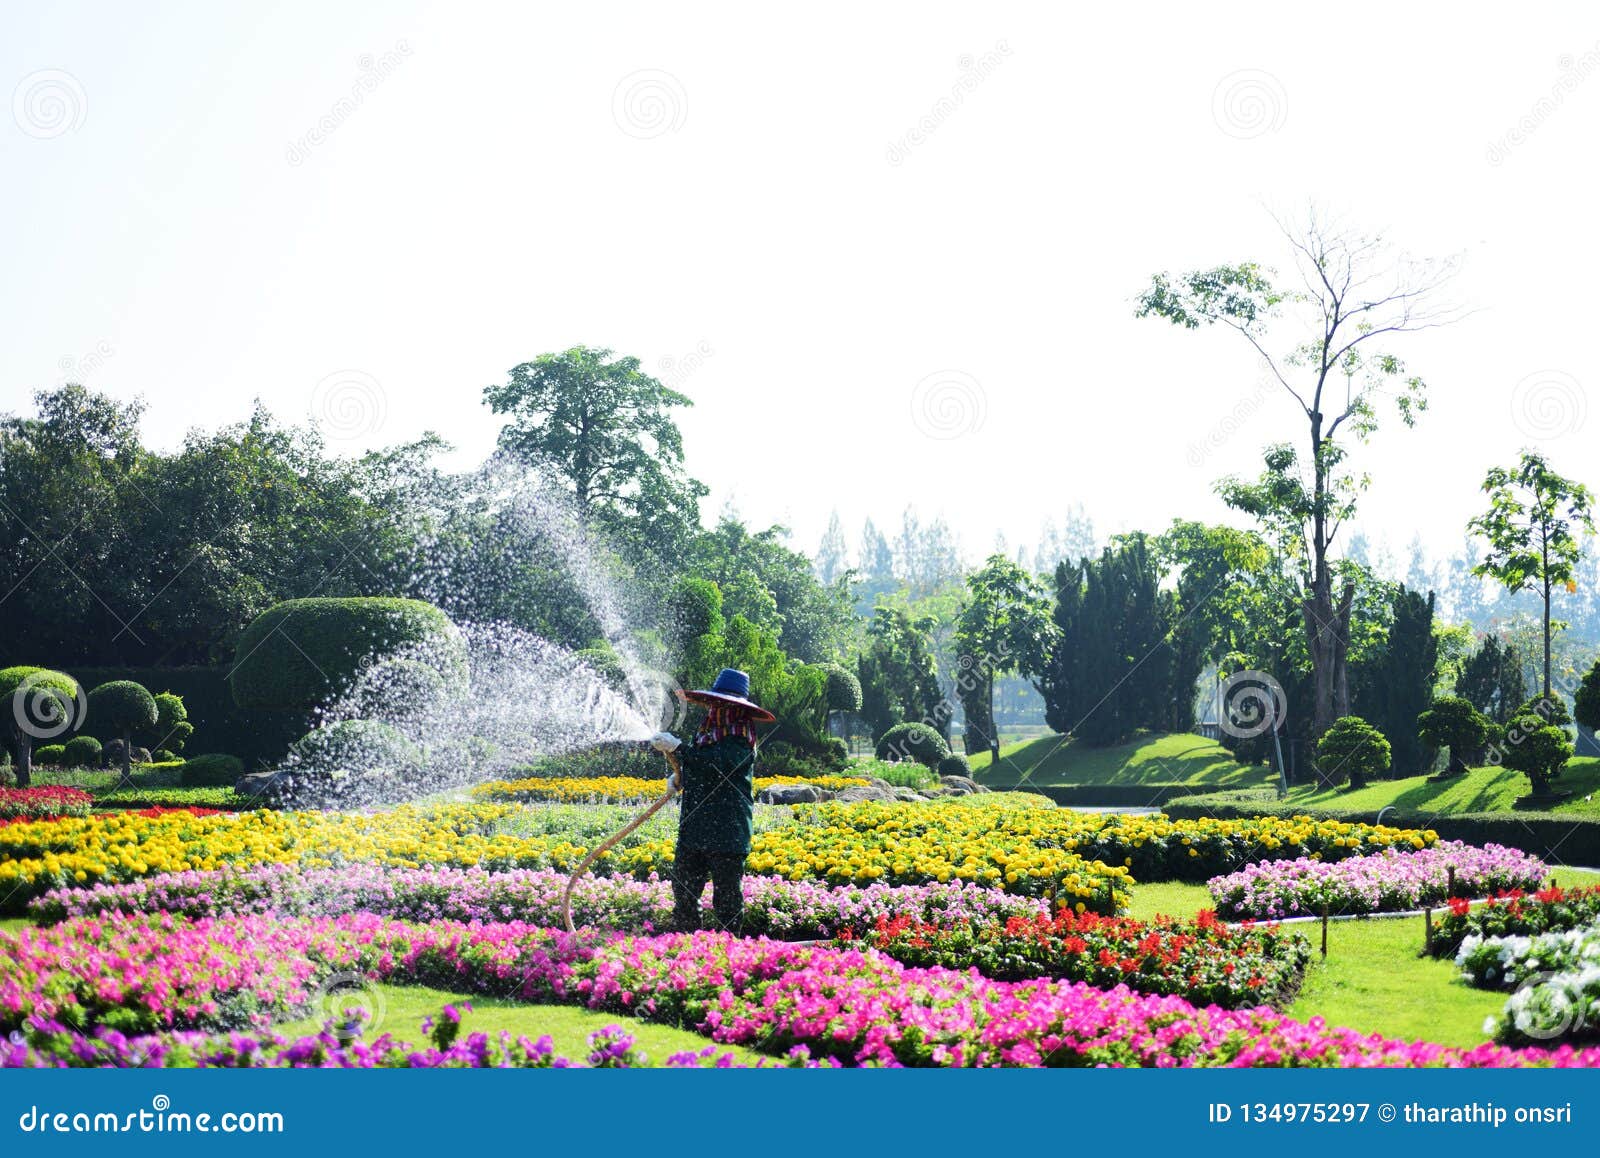 the gardener is watering the flowers at the park at long 9 park